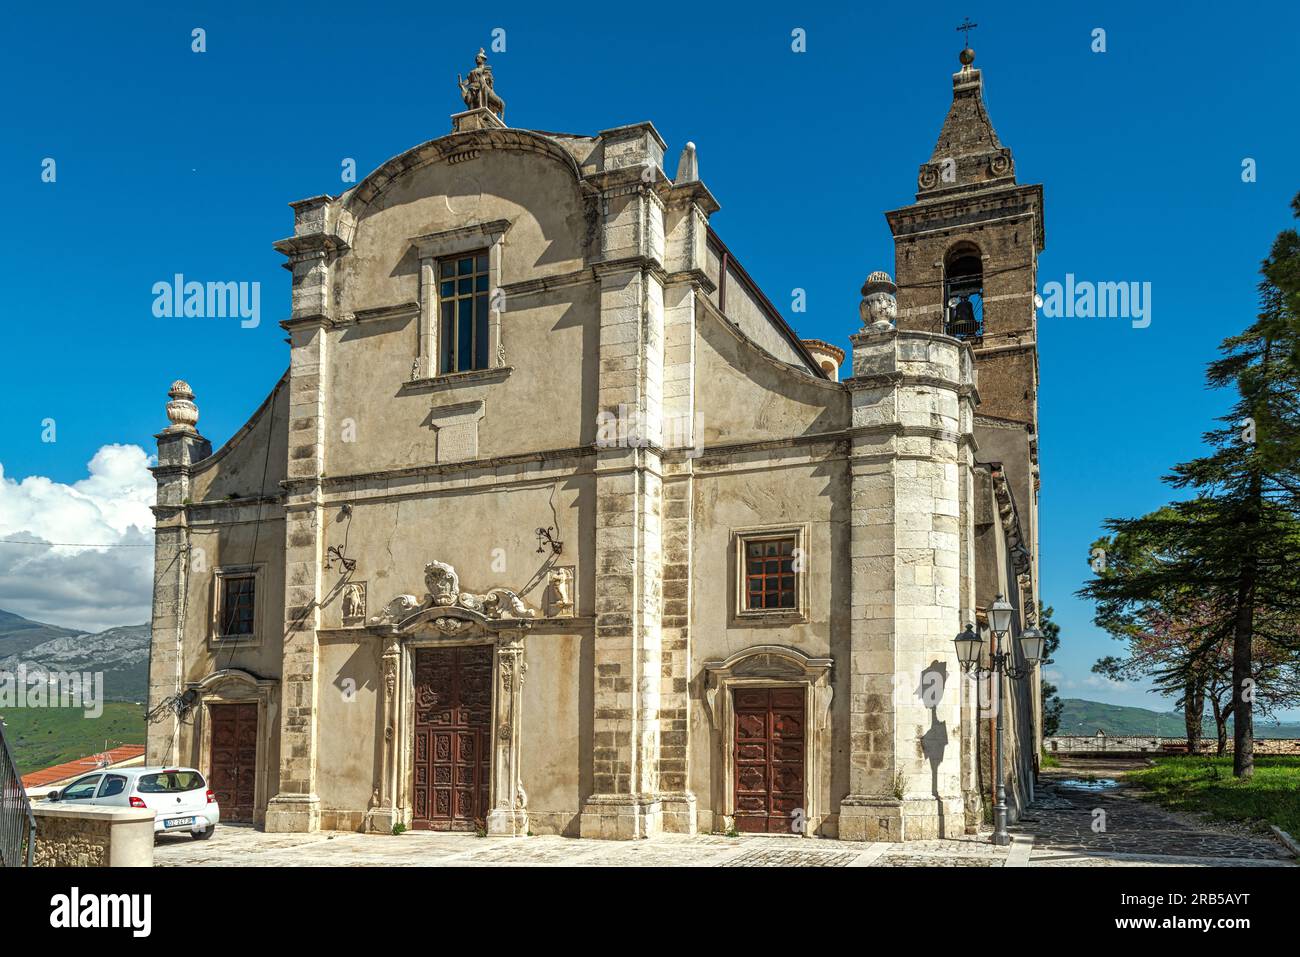 The church of Sant'Eustachio Martire is a Catholic church of Tocco da Casauria located in the historic center of the town, next to the Palazzo Ducale Stock Photo